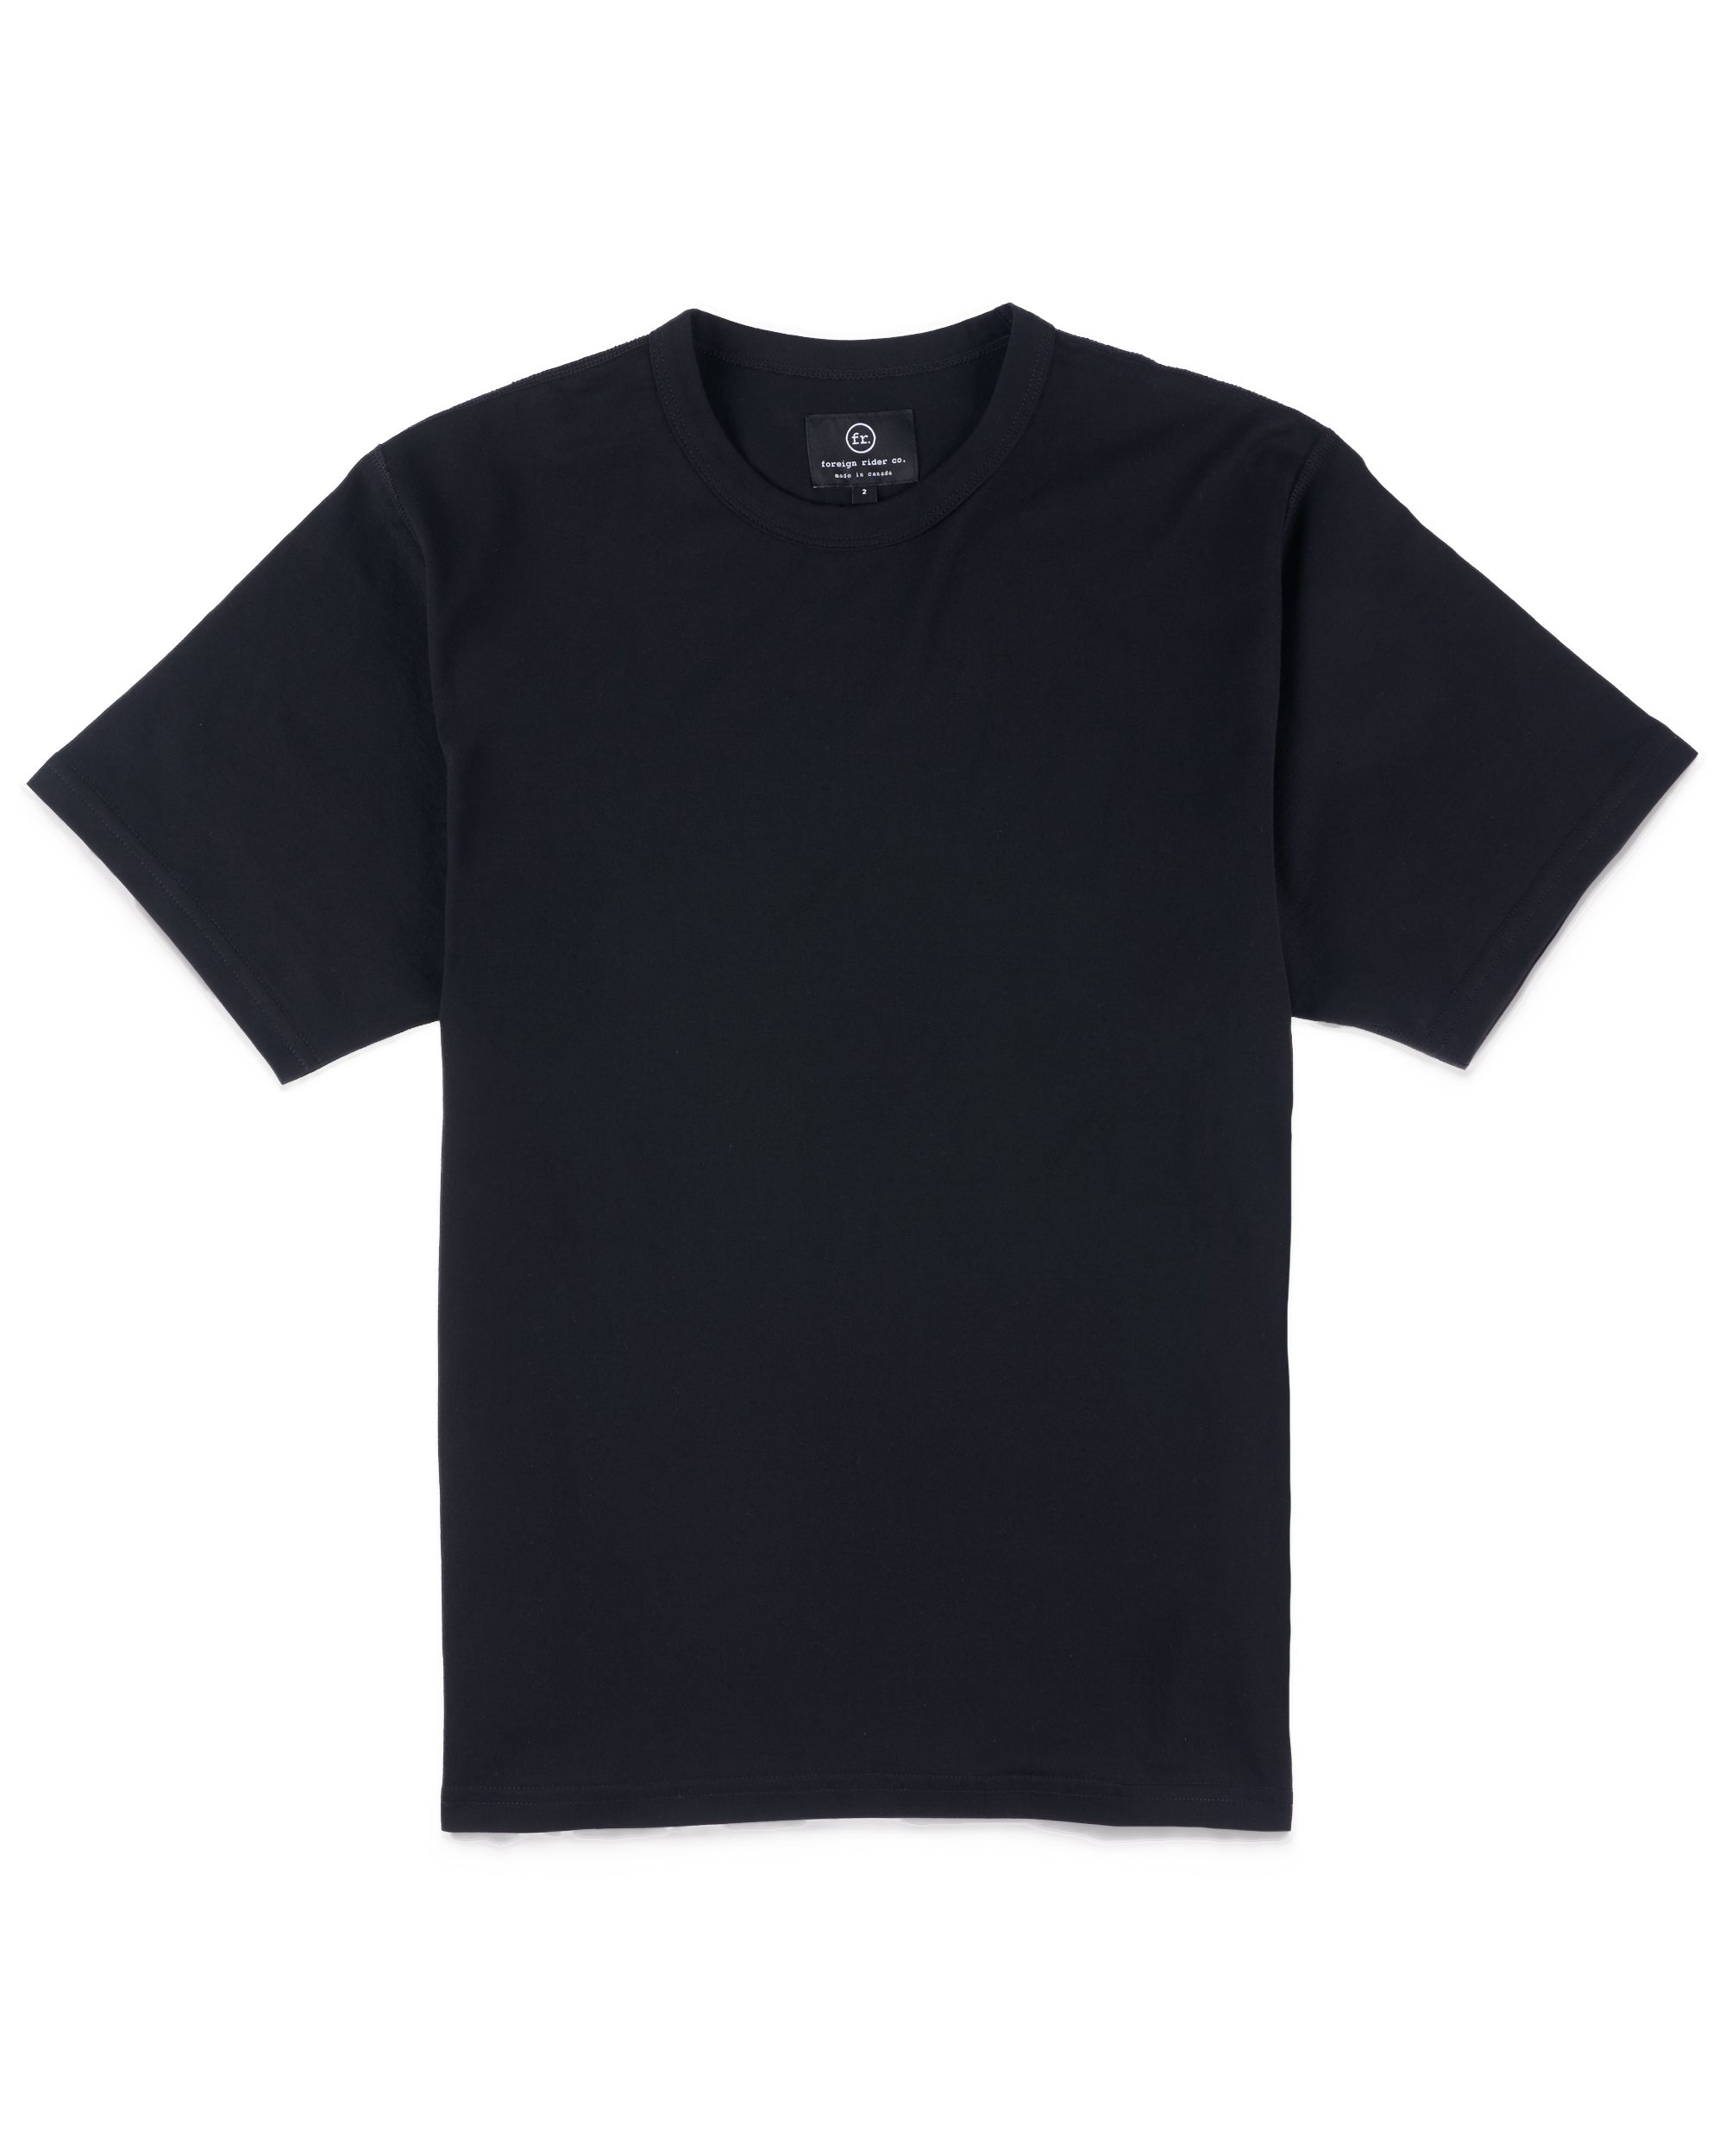 Supima SS T-Shirt Black - Foreign Rider Co.